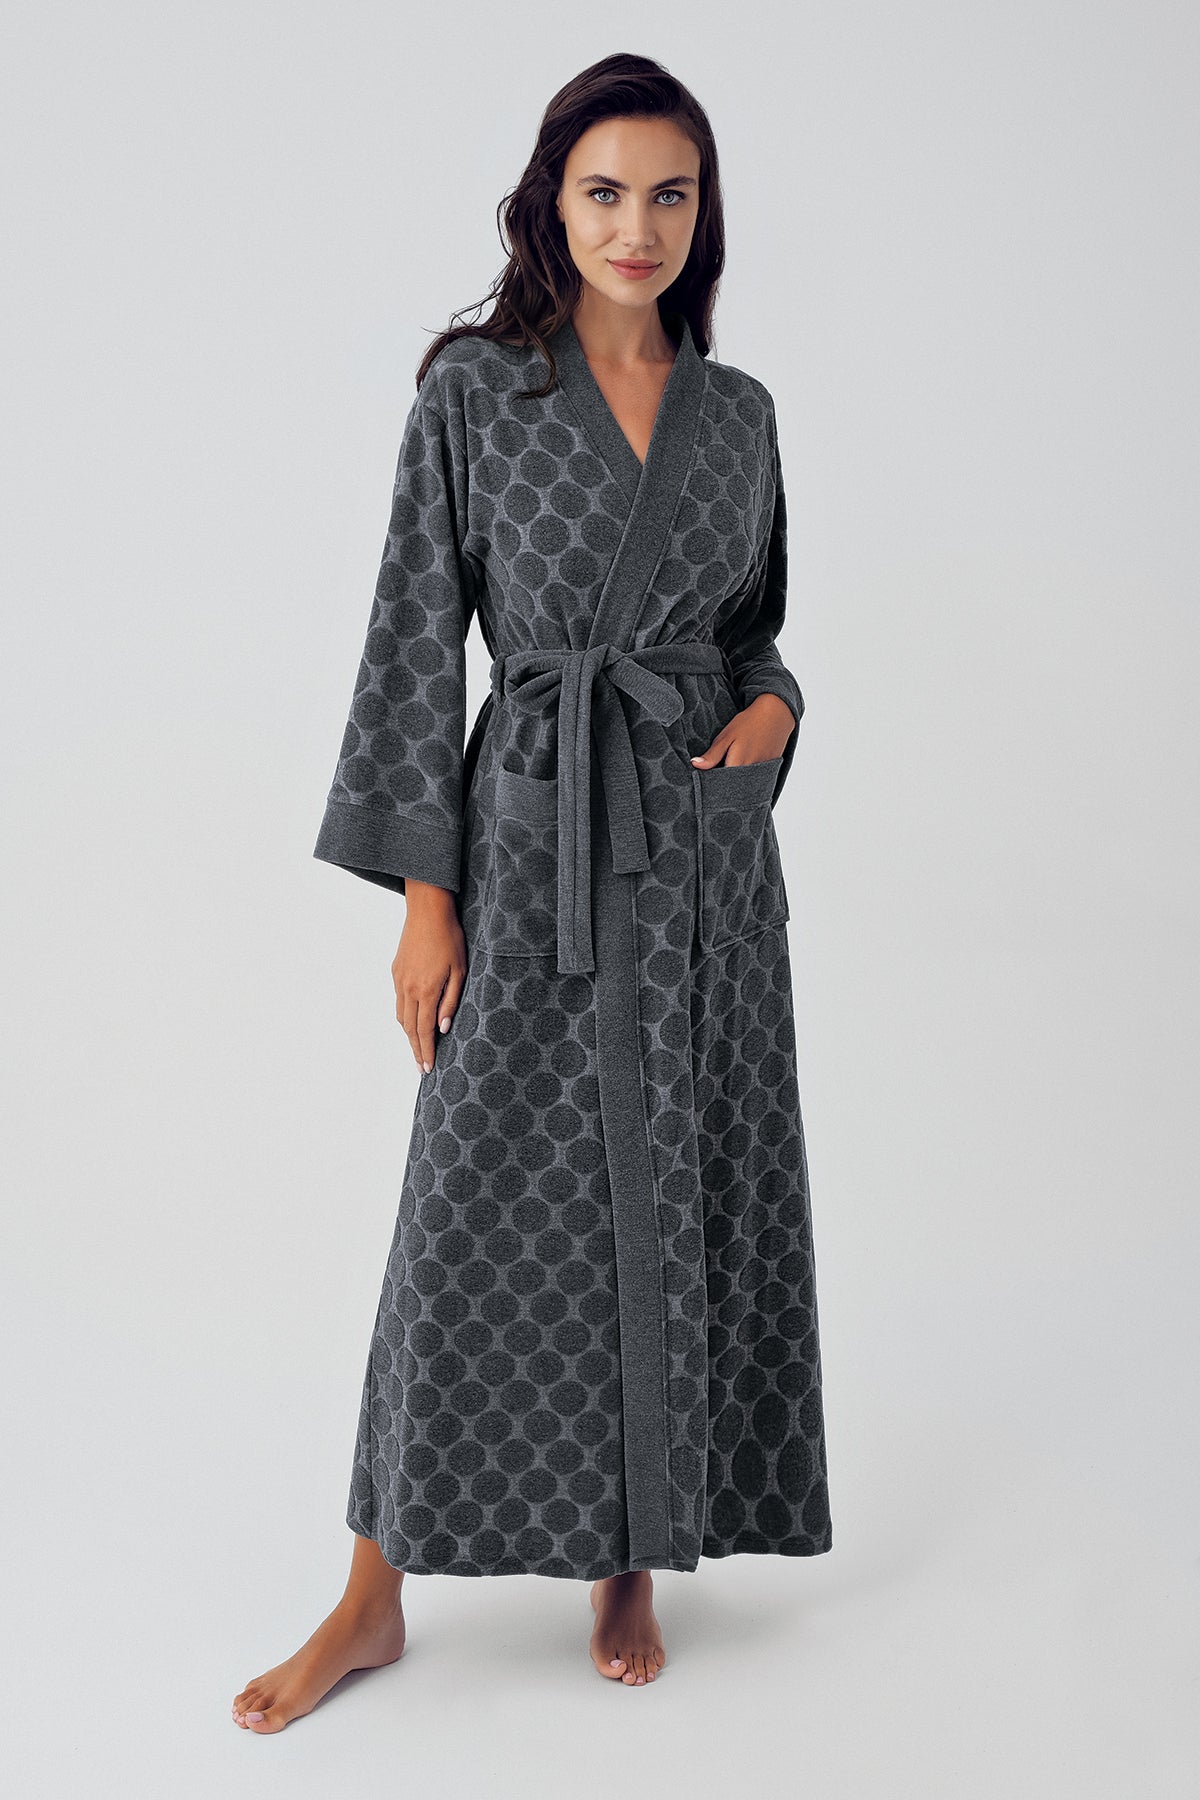 Shopymommy 500101 Terry Jacquard Maternity & Nursing Nightgown With Robe Anthracite